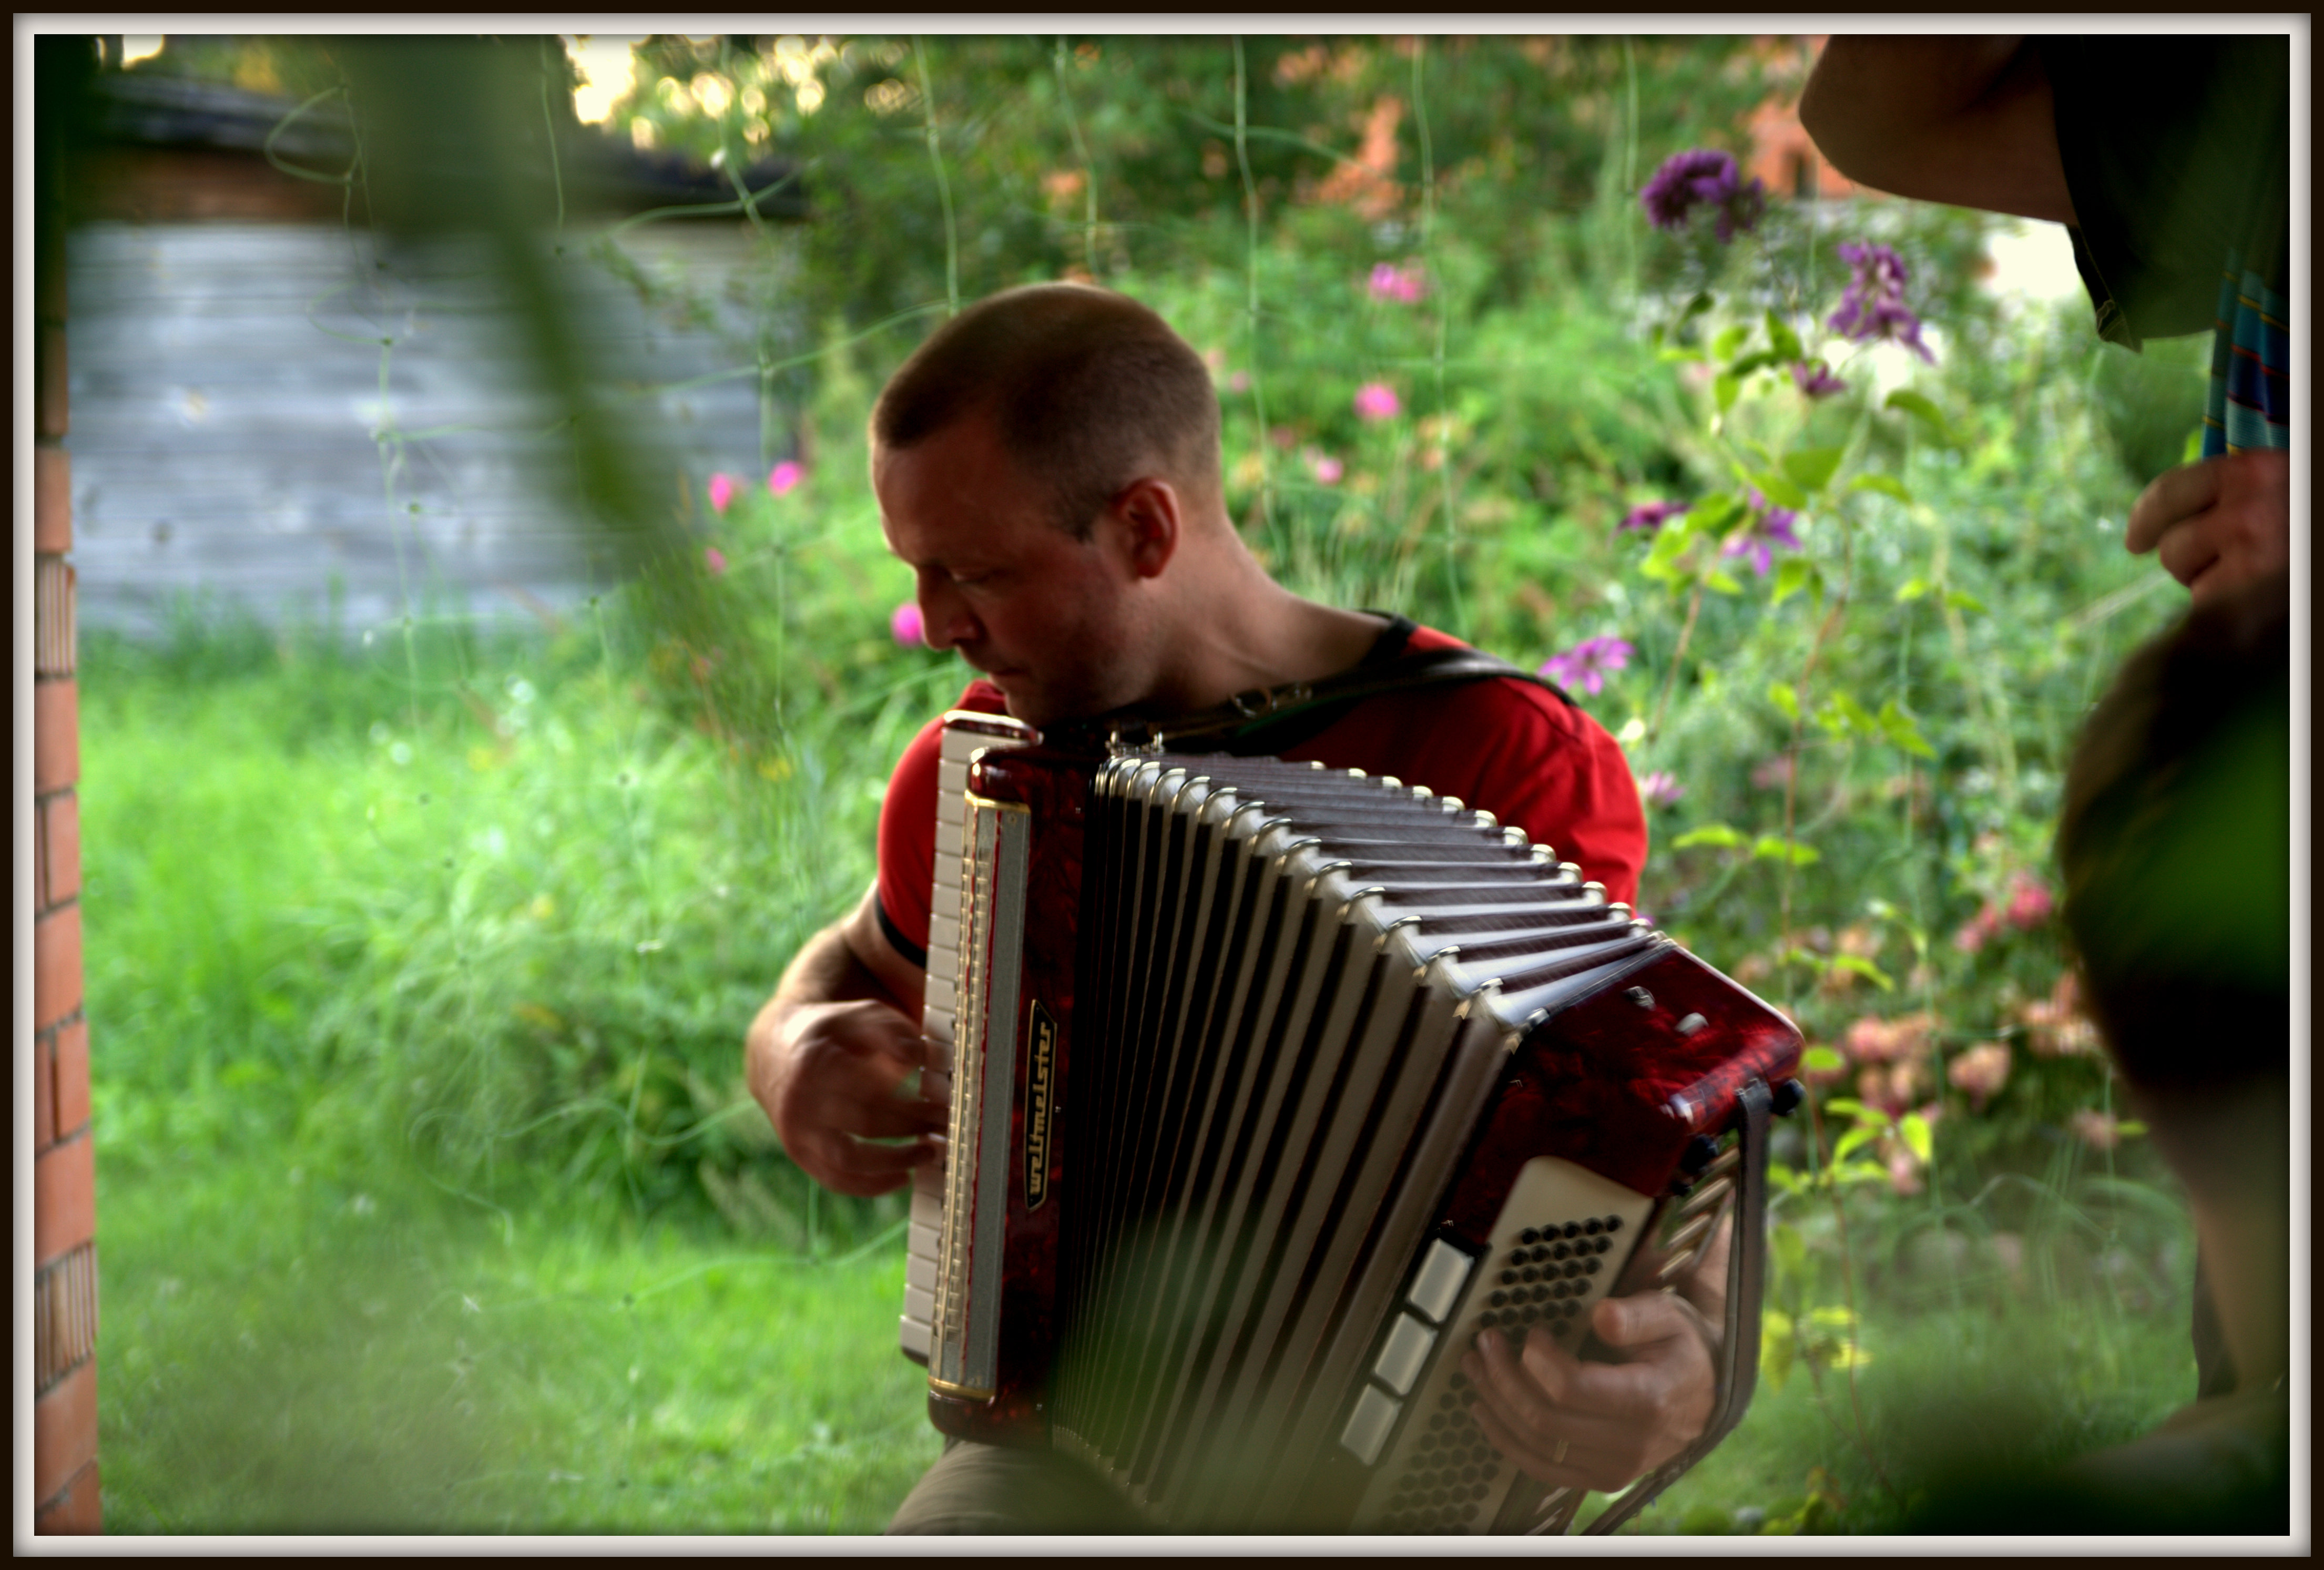 Accordion player in Somerset